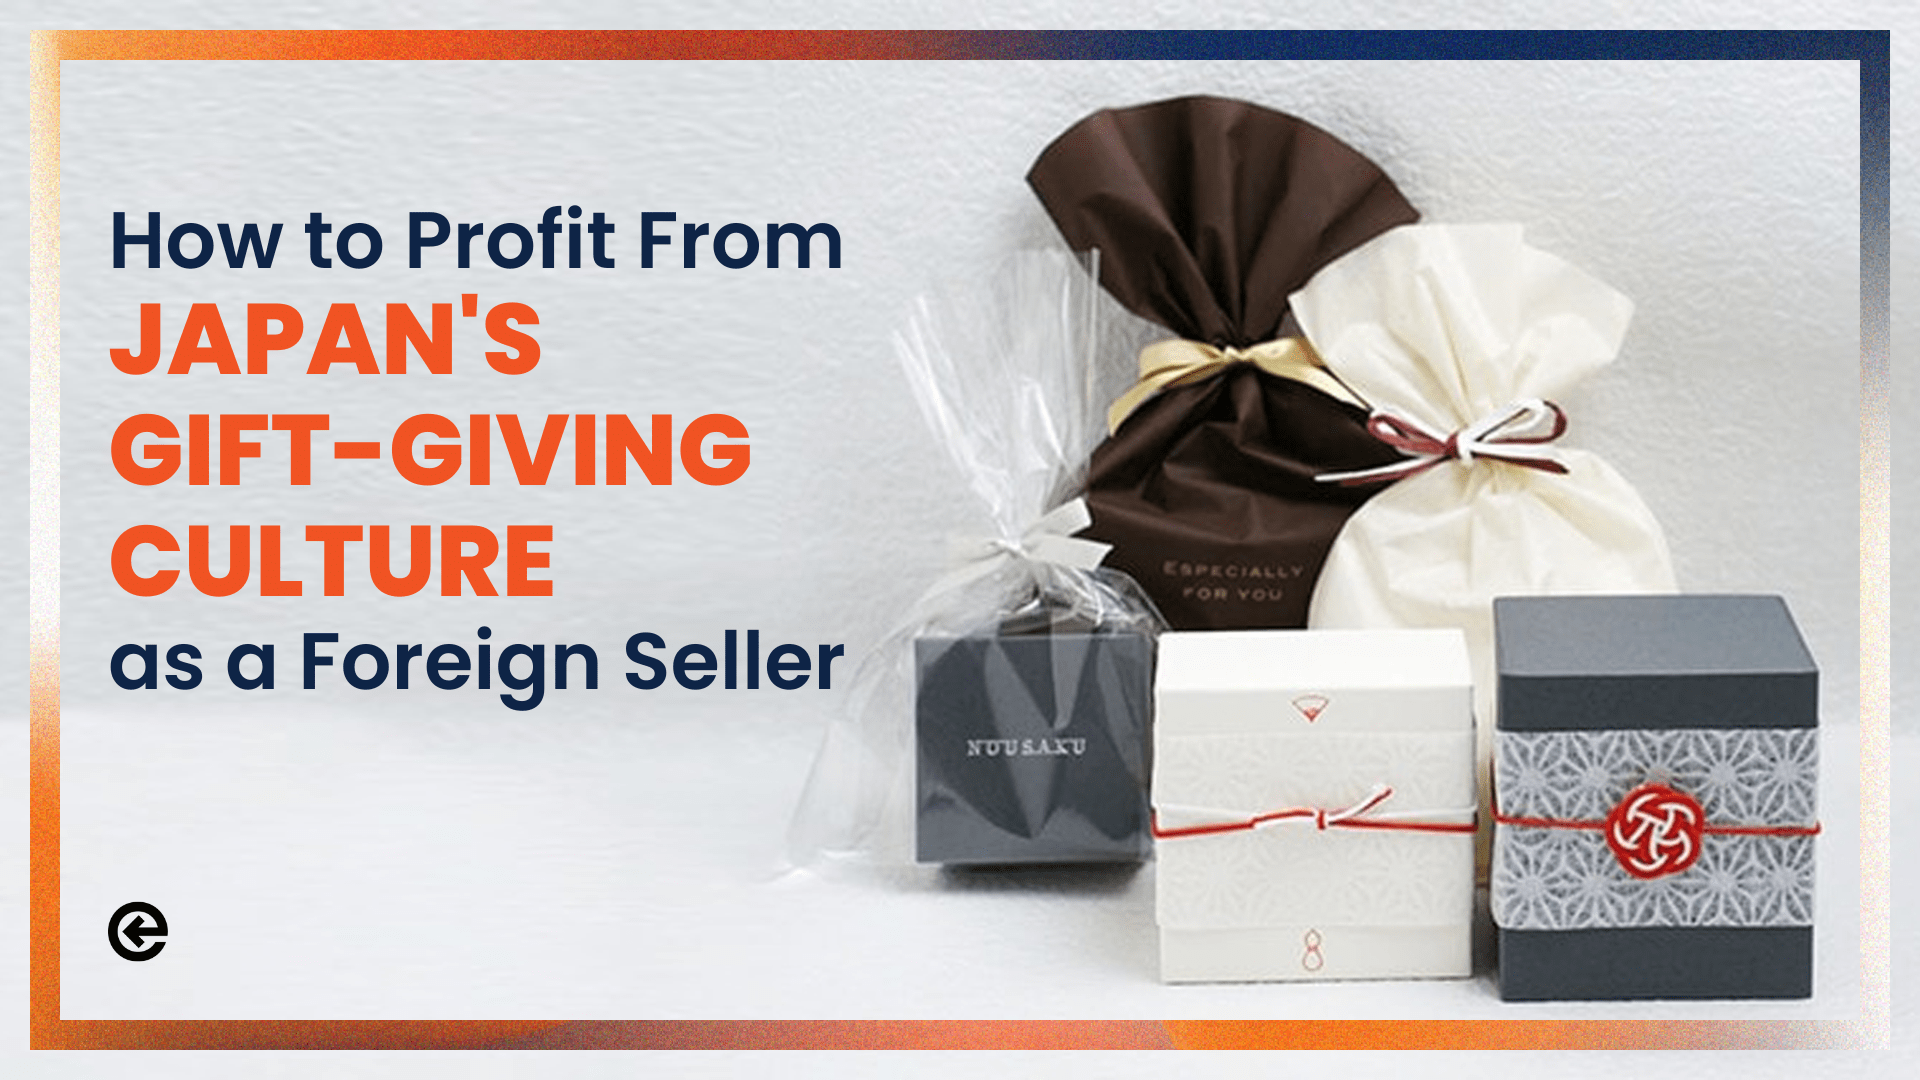 How to Profit From Japan’s Gift-Giving Culture as a Foreign Seller